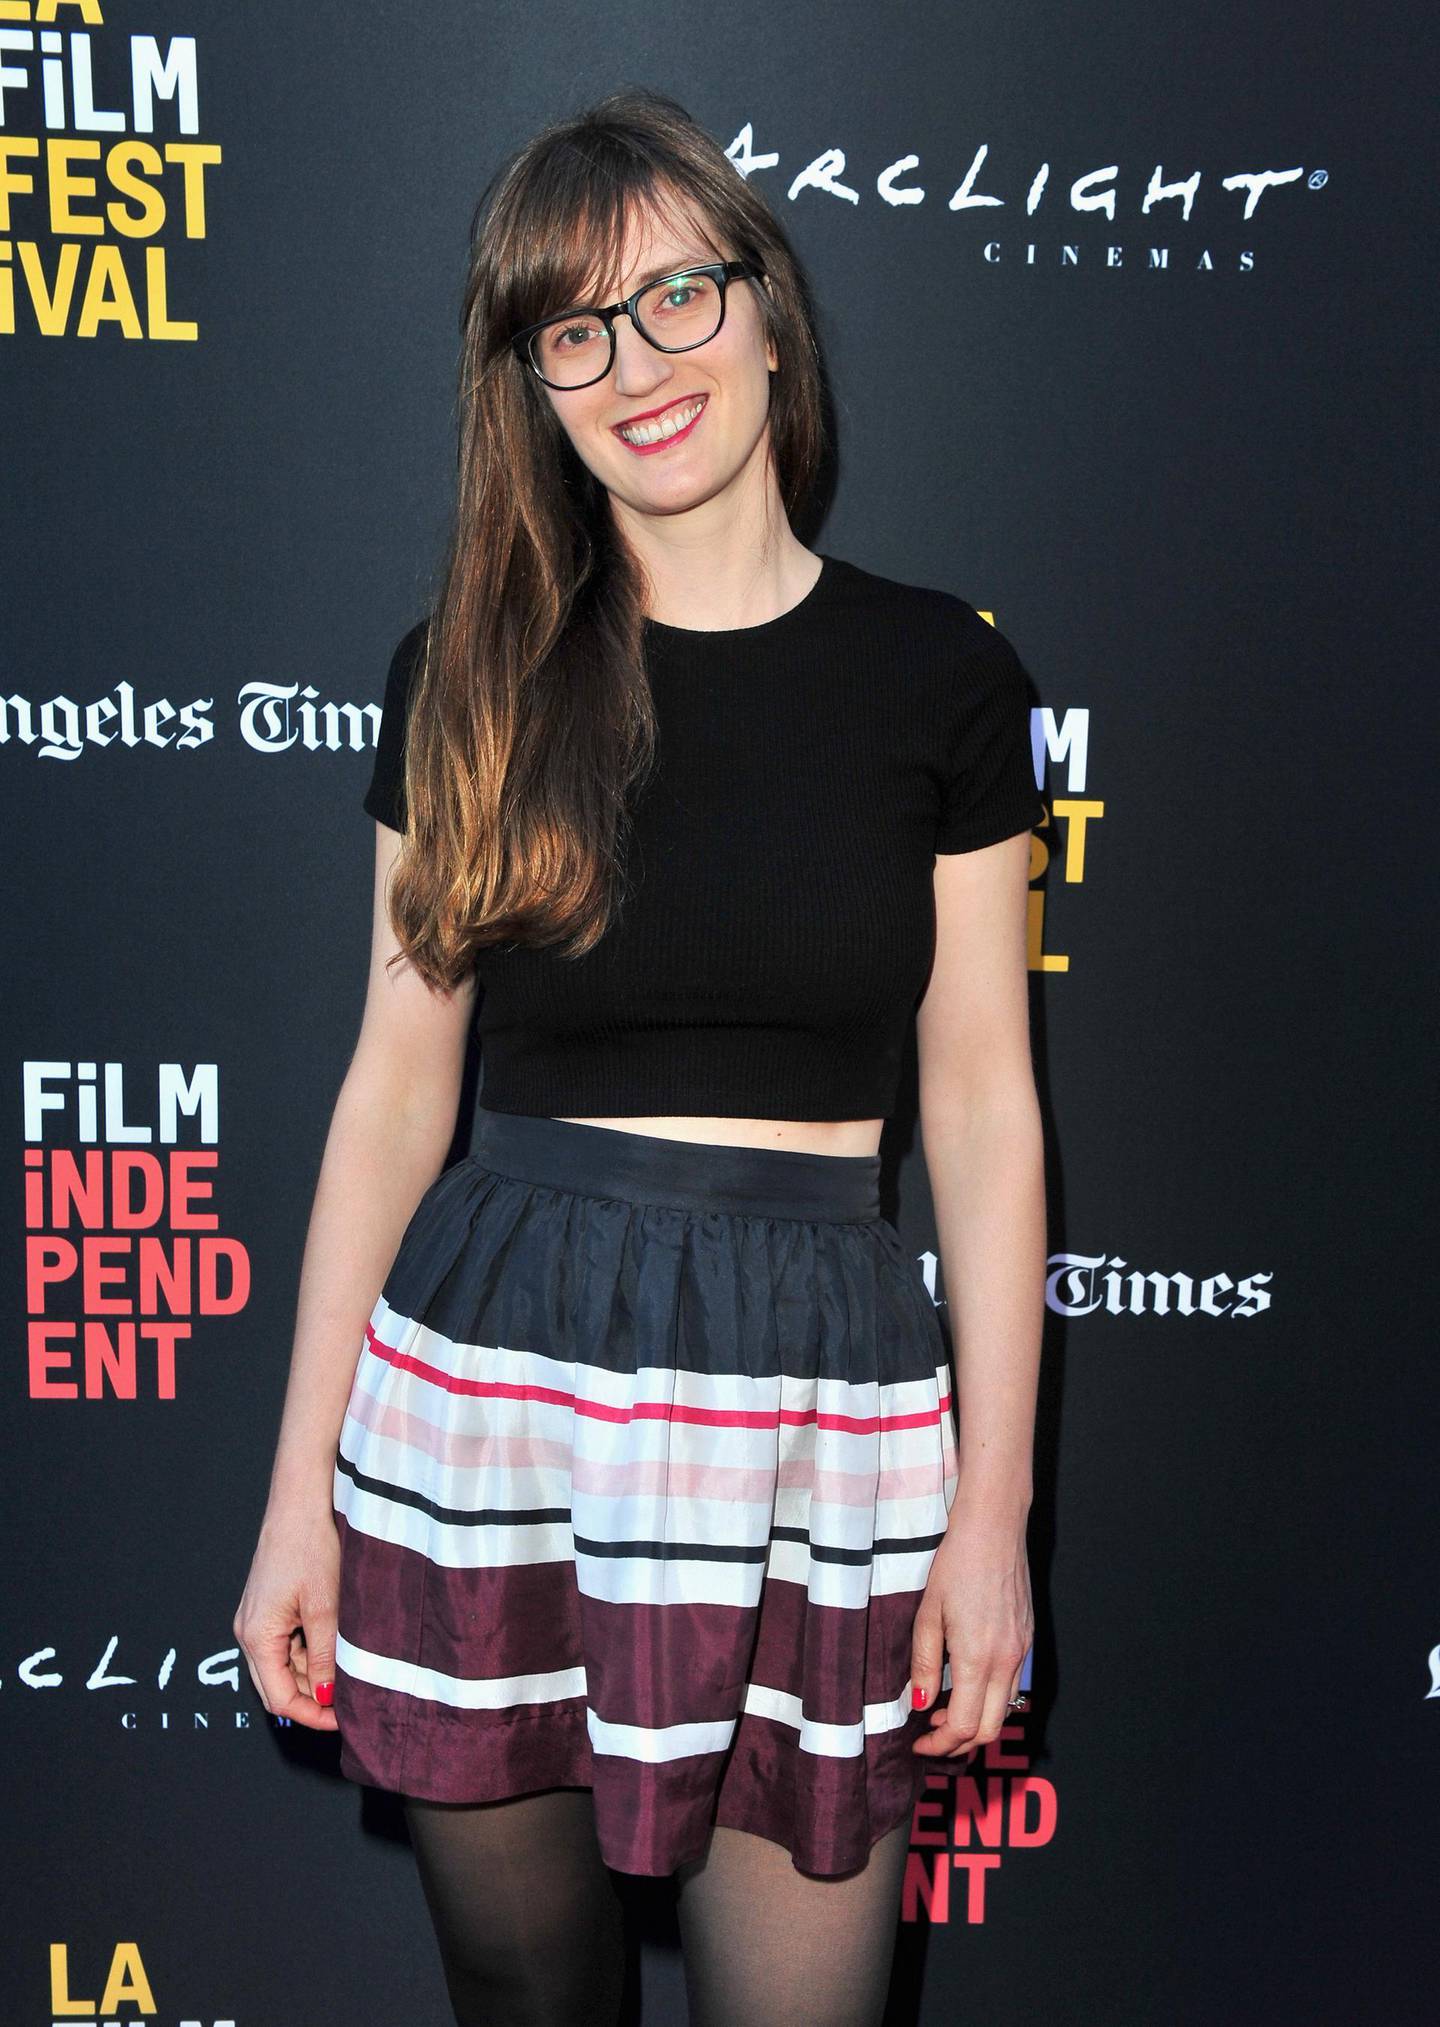 CULVER CITY, CA - SEPTEMBER 22:  Annie Hart attends the screening of "Banana Split" during the 2018 LA Film Festival at ArcLight Culver City on September 22, 2018 in Culver City, California.  (Photo by Jerod Harris/Getty Images for Film Independent)